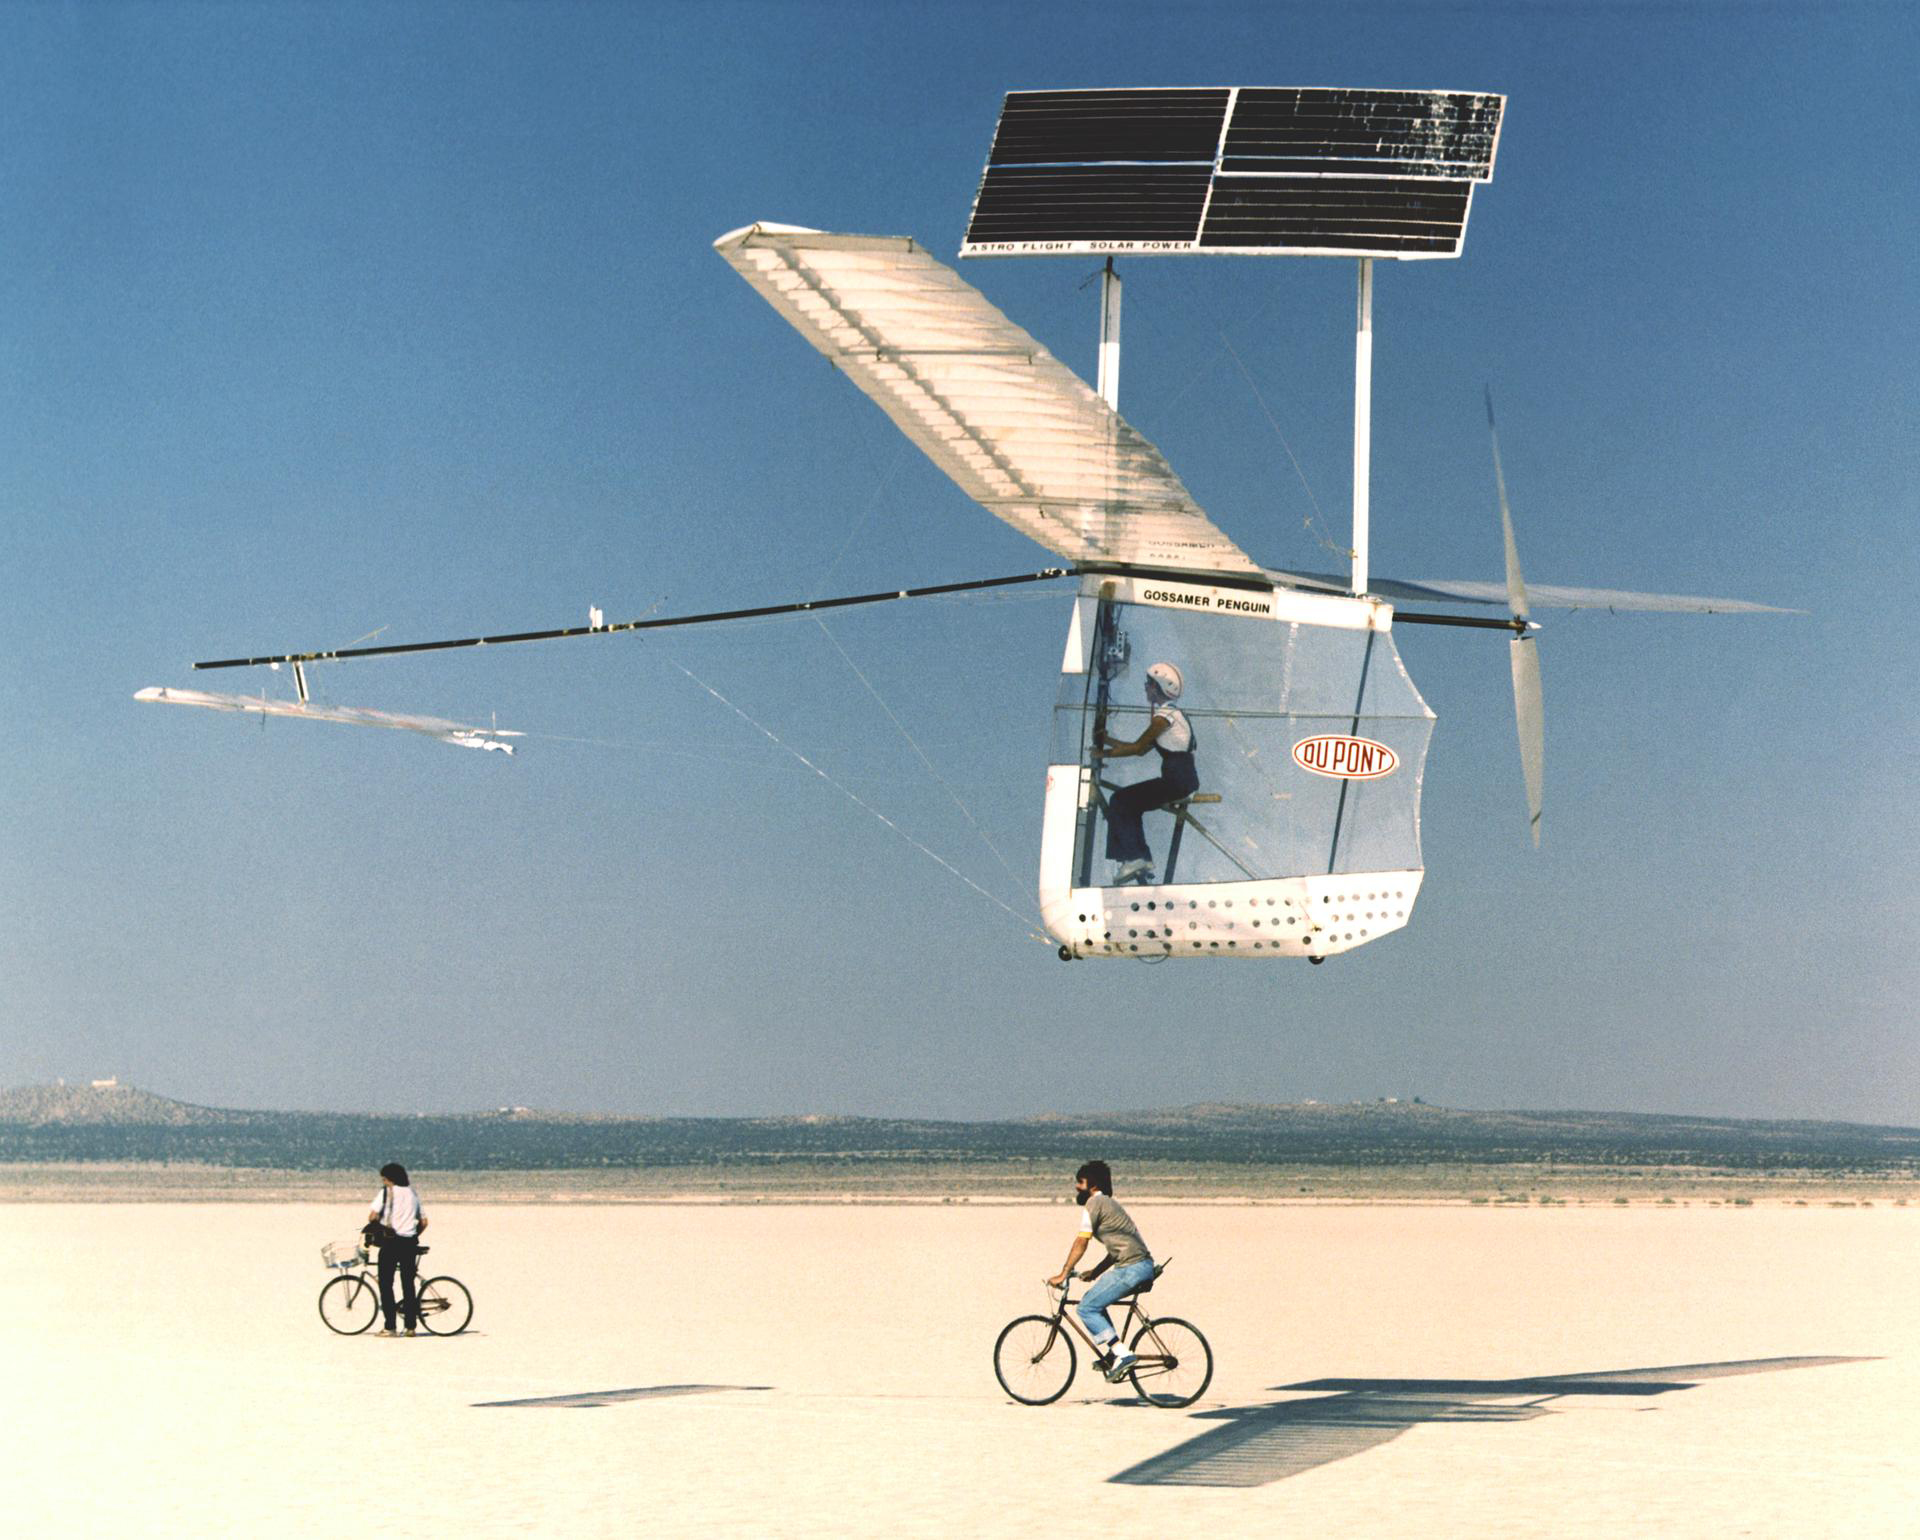 The solar powered and human piloted Gossamer Penguin flies in 1980 from NASA’s Armstrong (then Dryden) Flight Research Center 